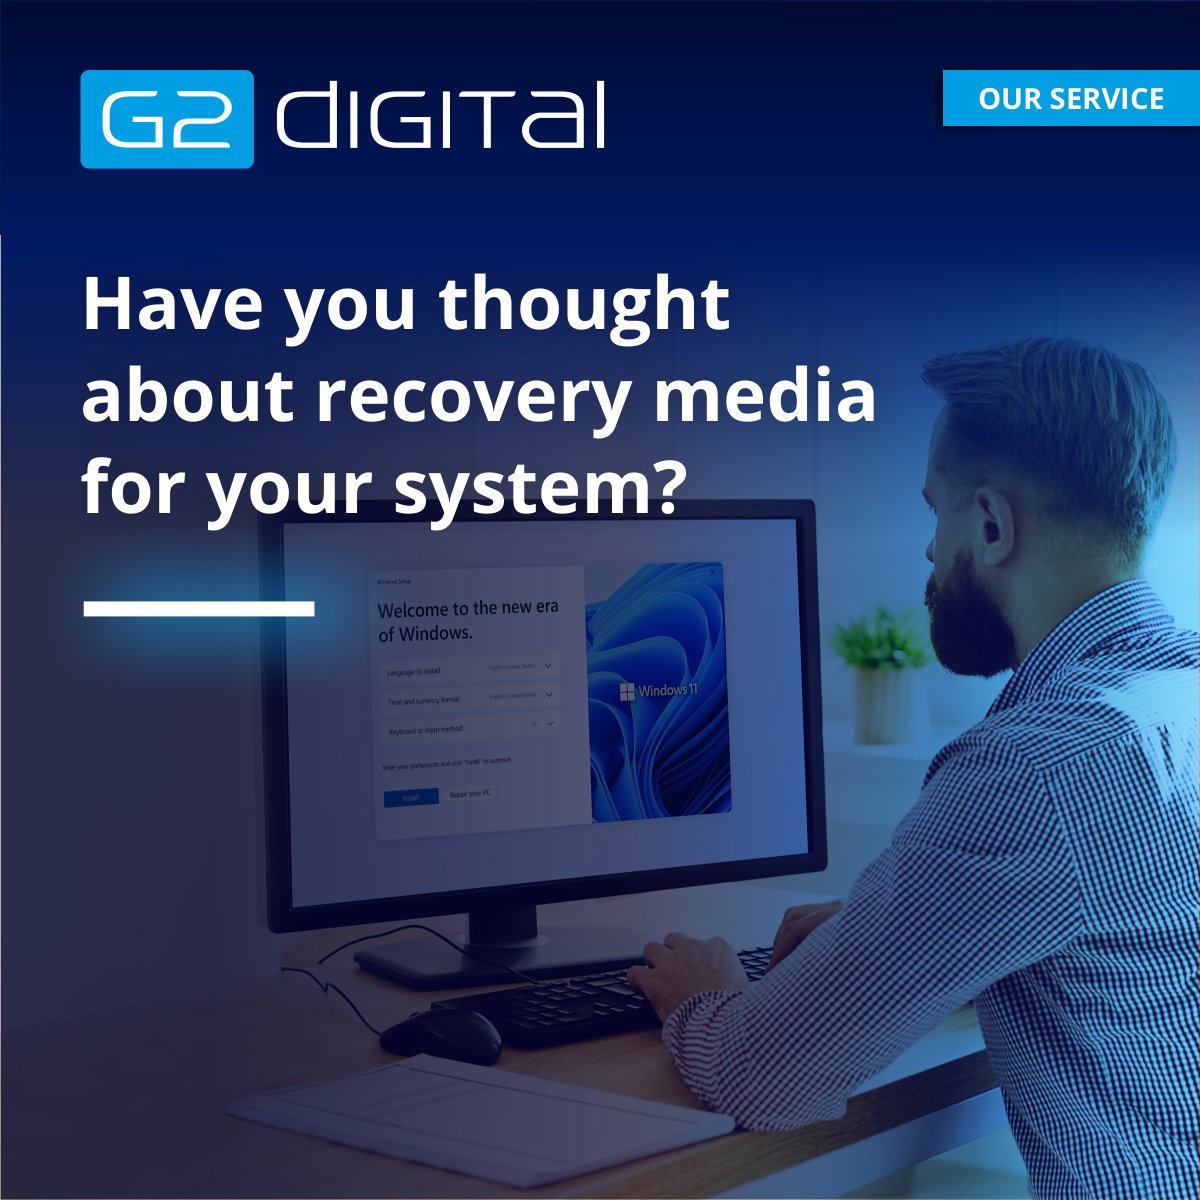 Did you know you can purchase a USB key that will allow you to take a backup of your PC and restore it or carry out a full factory reset? For more information, please contact sales@g2digital.co.uk

#G2Digital #RackMount #RackMountPC #Workstation #Support